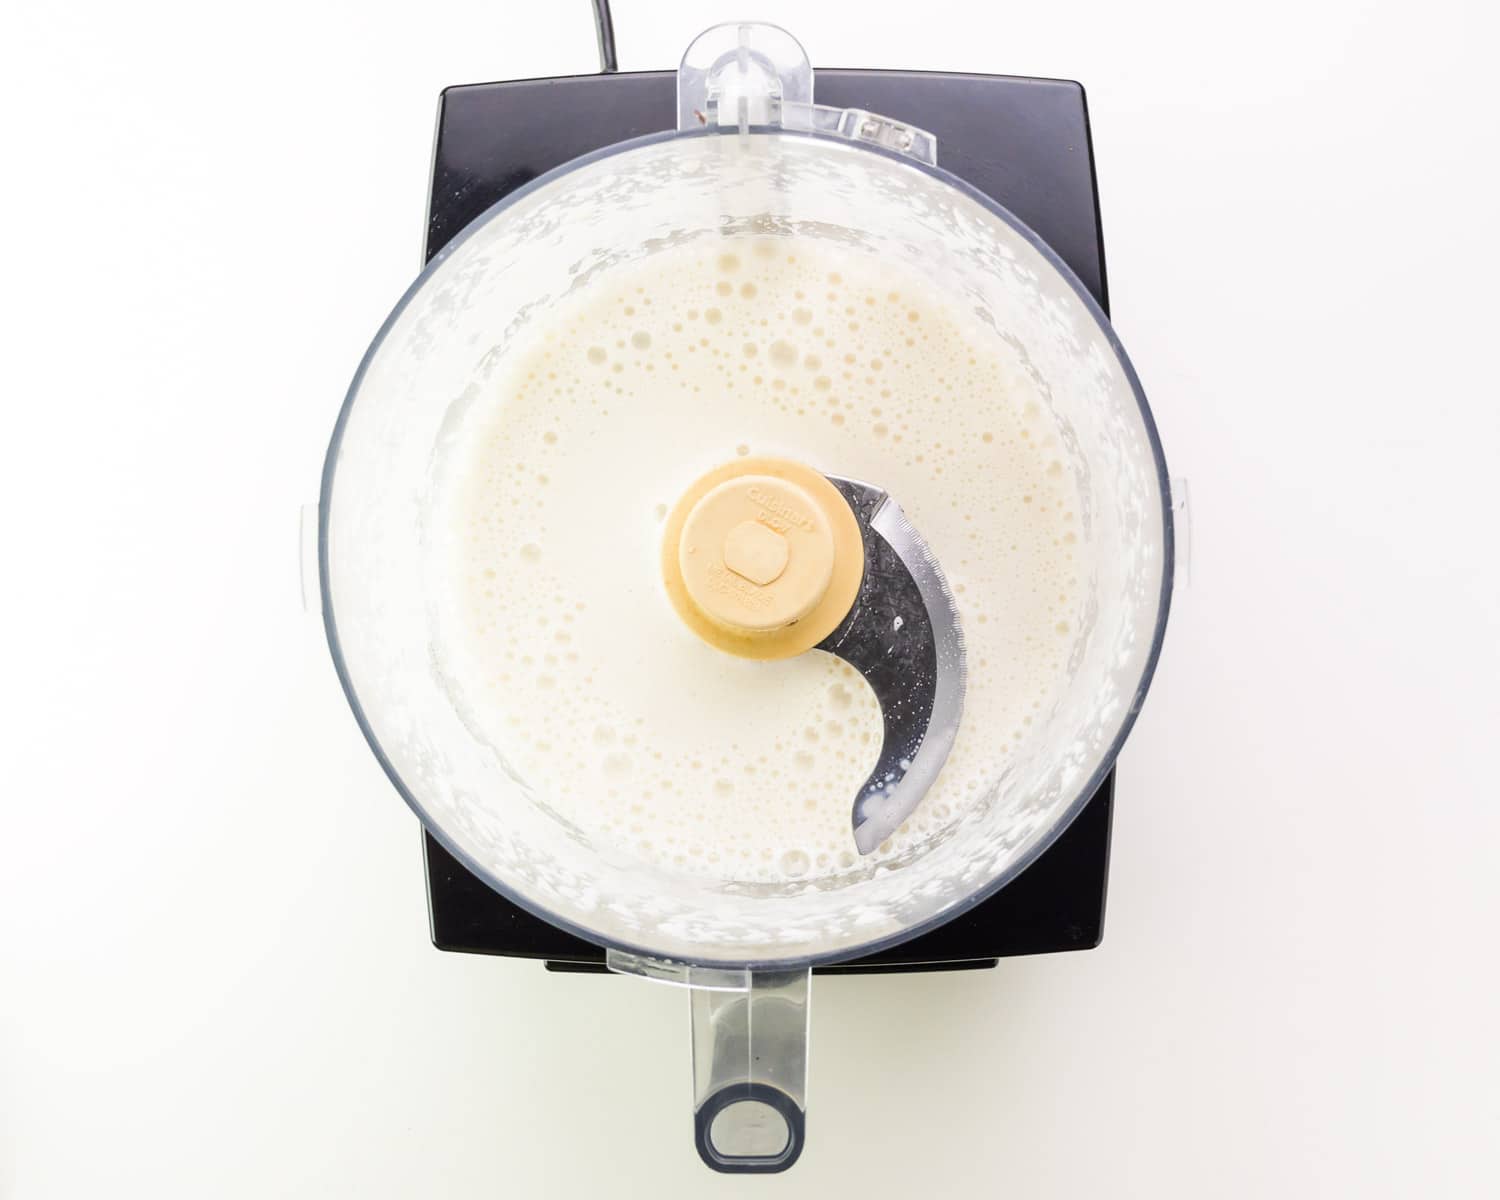 Looking down on a food processor with bubbly soy milk.